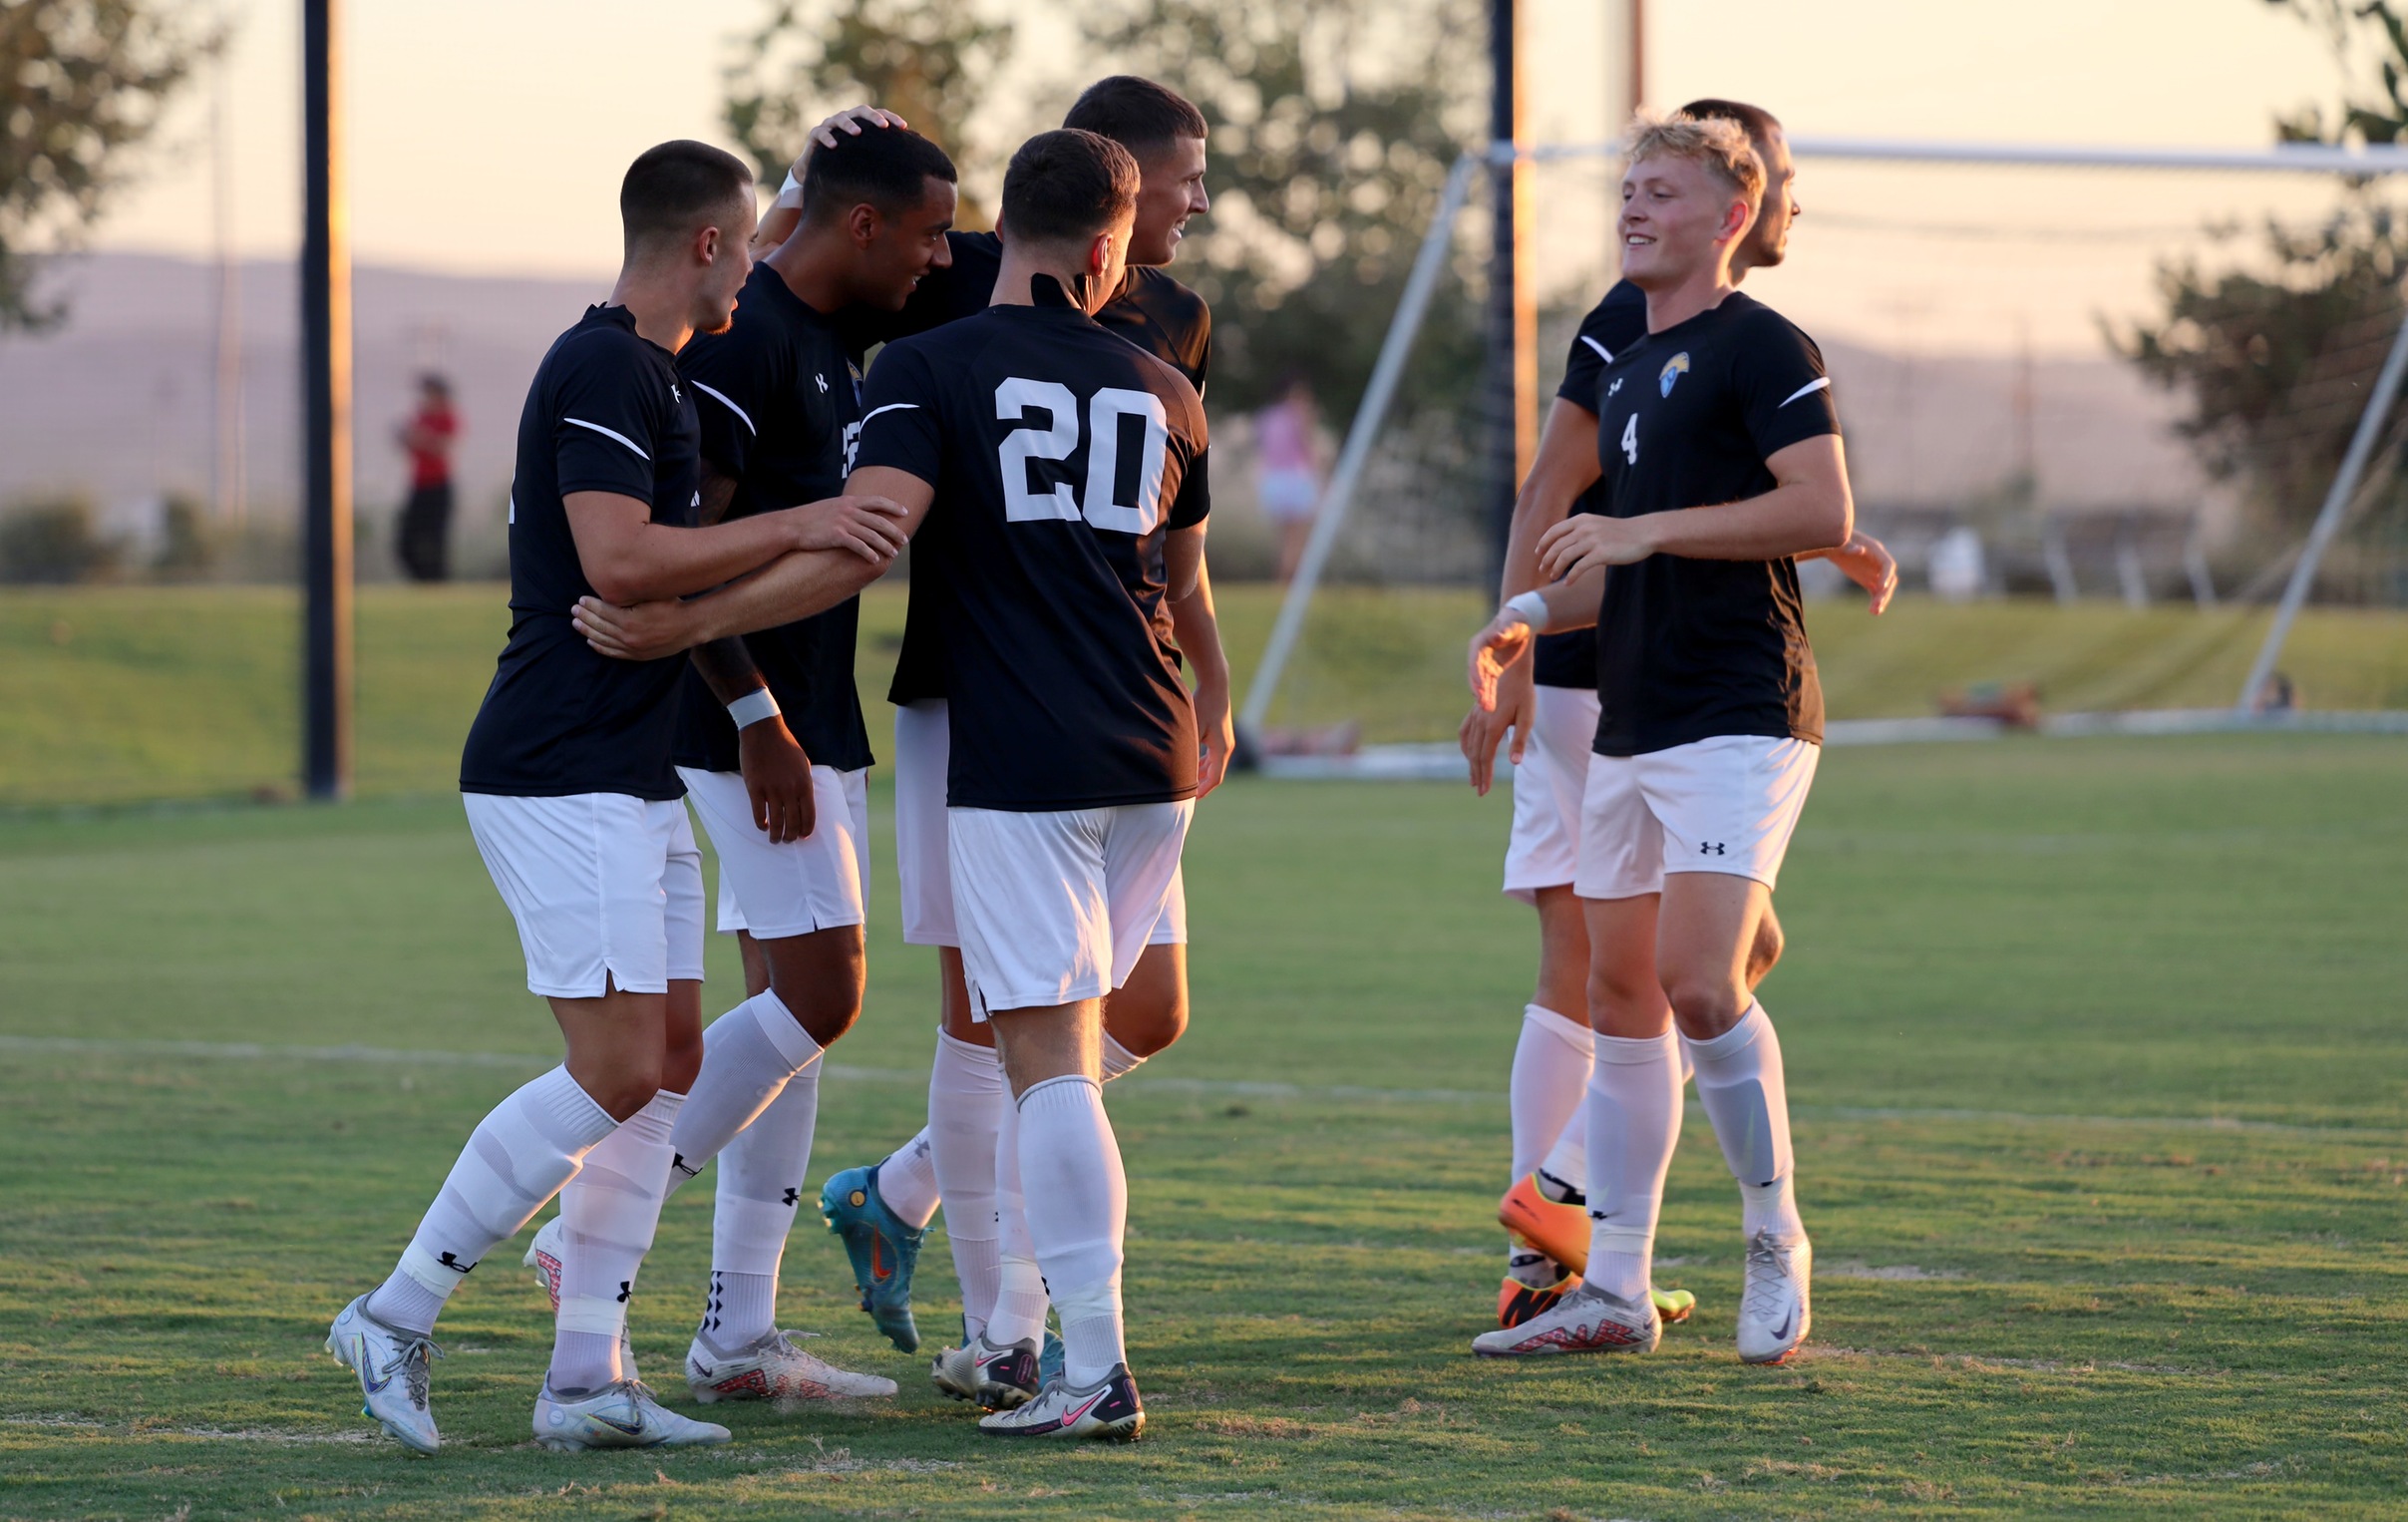 Westcliff moved to 1-1 with a 5-0 win over Life Pacific Wednesday night. Photo by Sanjay Joshi.